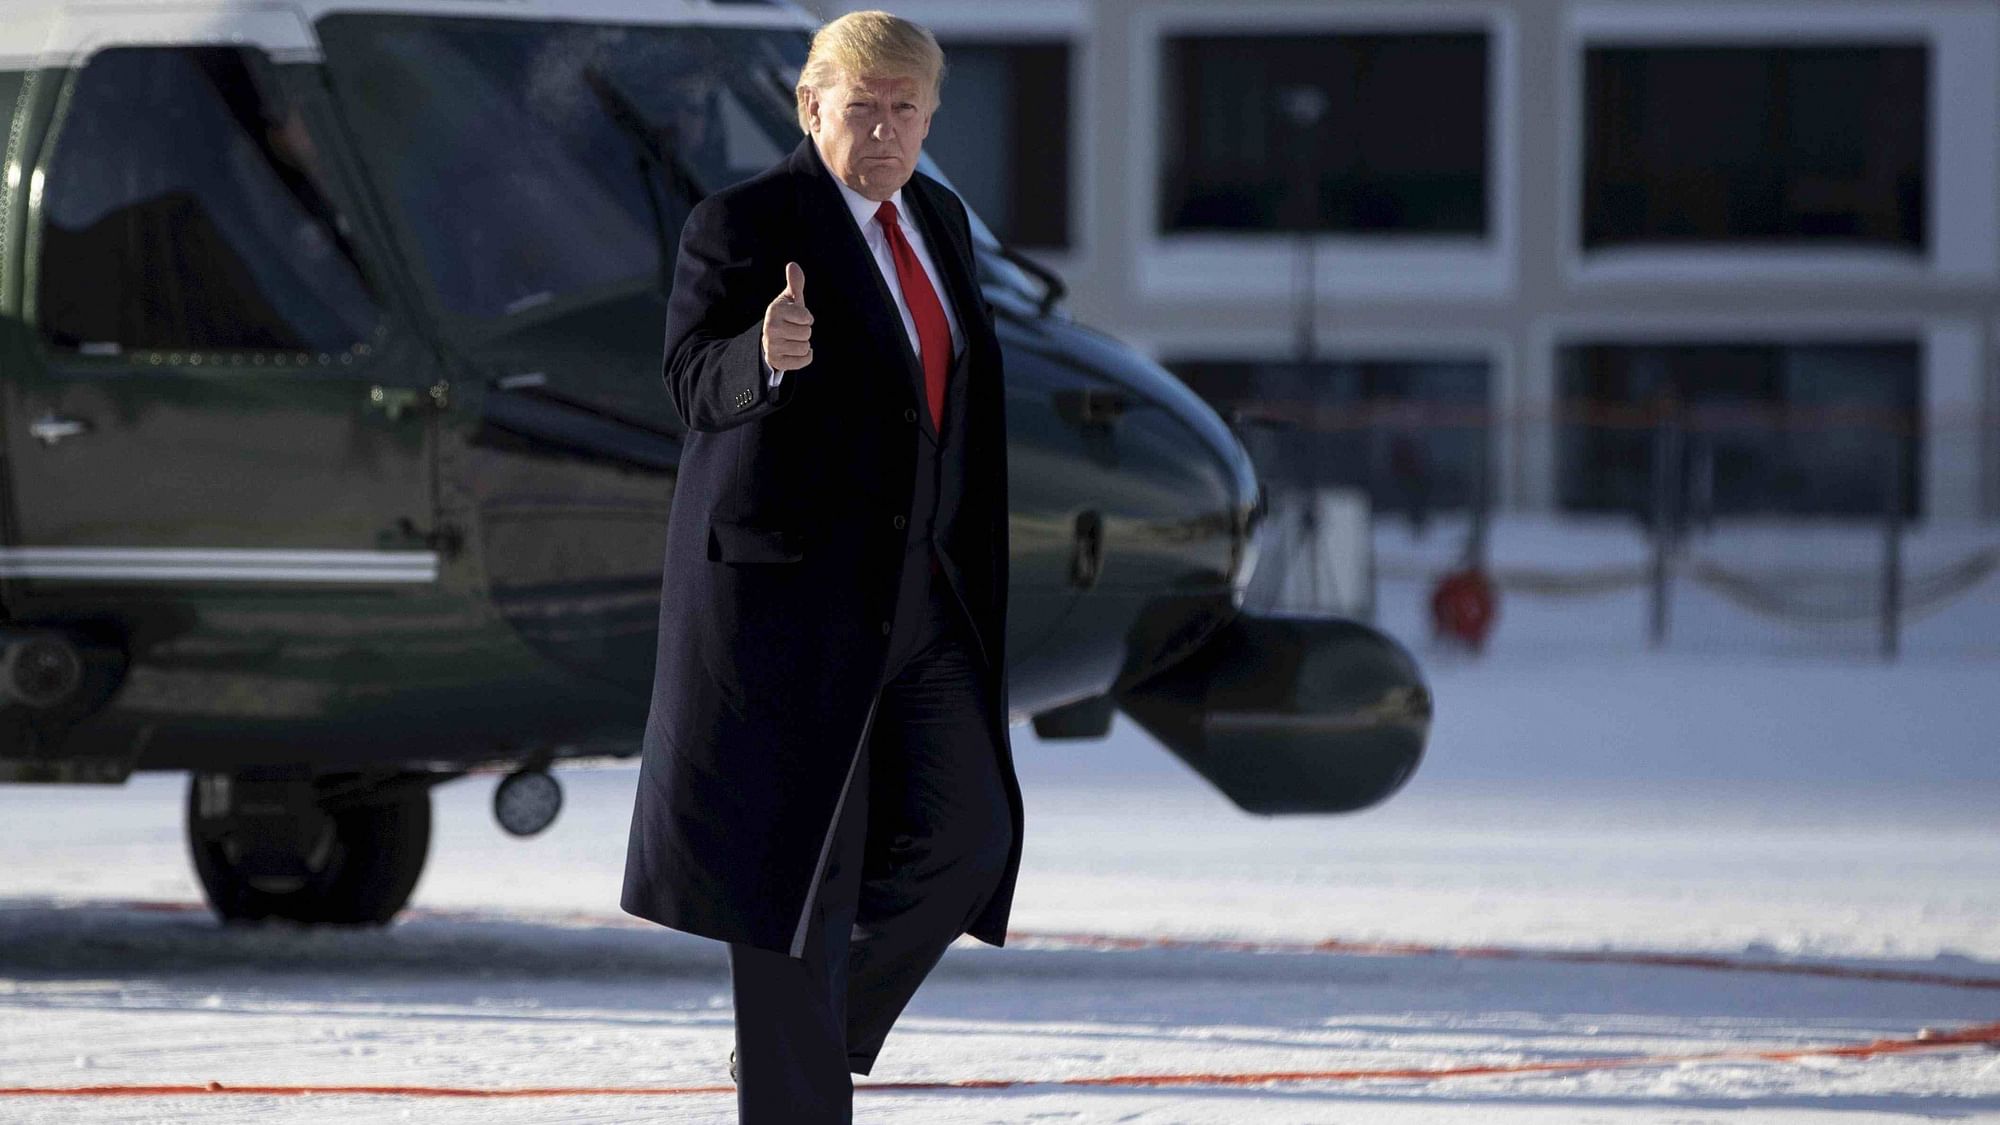 US President Donald Trump gestures as he arrives in Davos, Switzerland on 21 January.